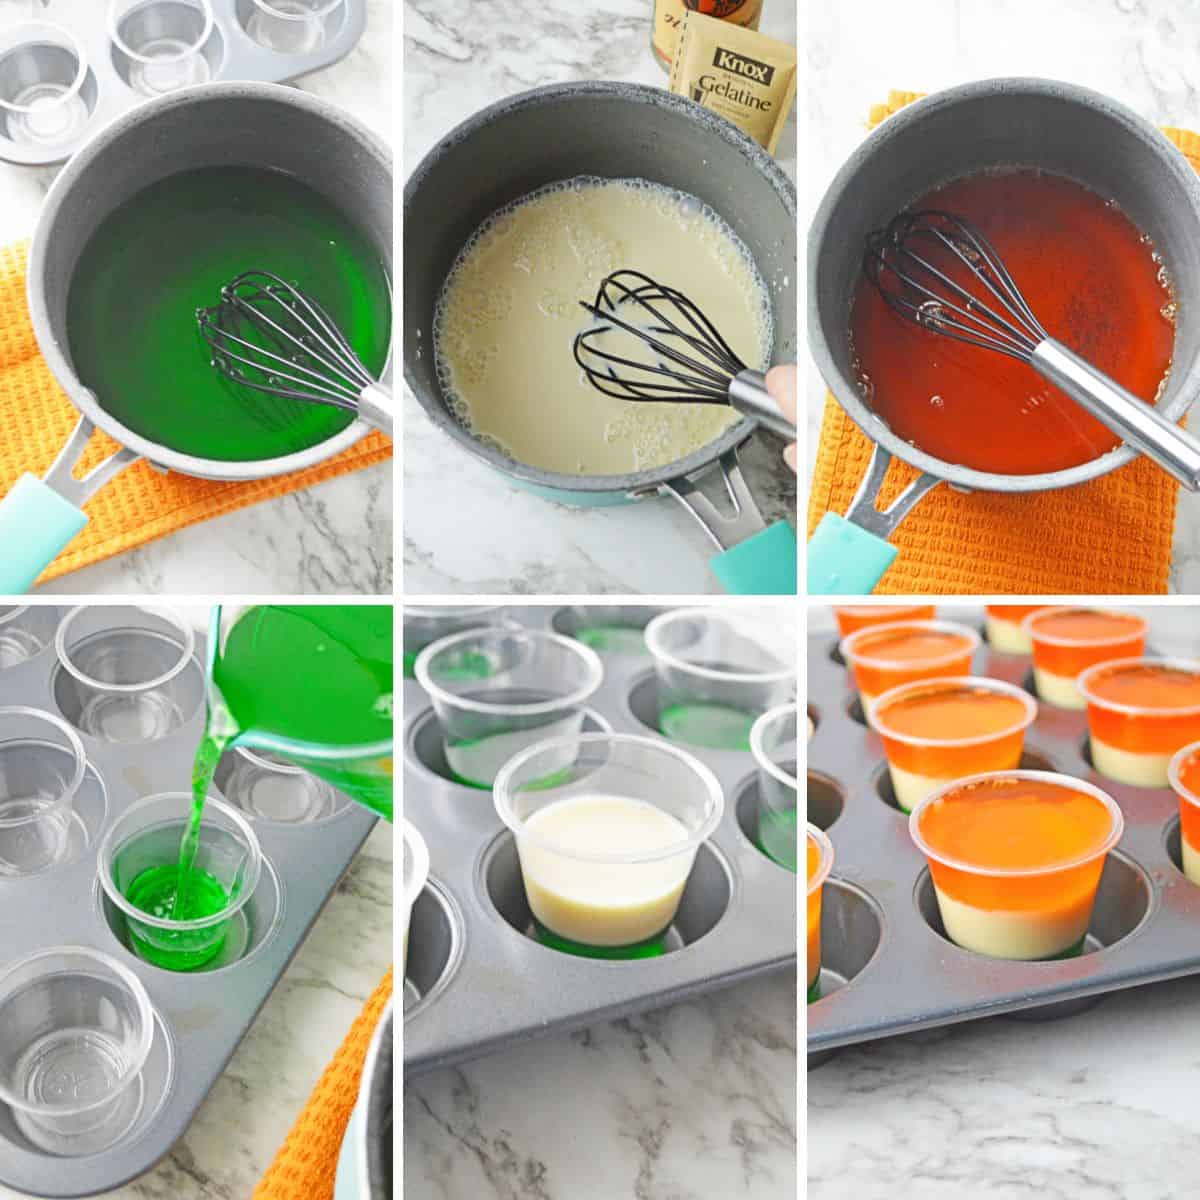 Six image collage showing bowls of green, white, and orange jello mix with a wire whisk, green liquid being poured into shot cups, white jello added to the cups, and the final layer of orange jello added.